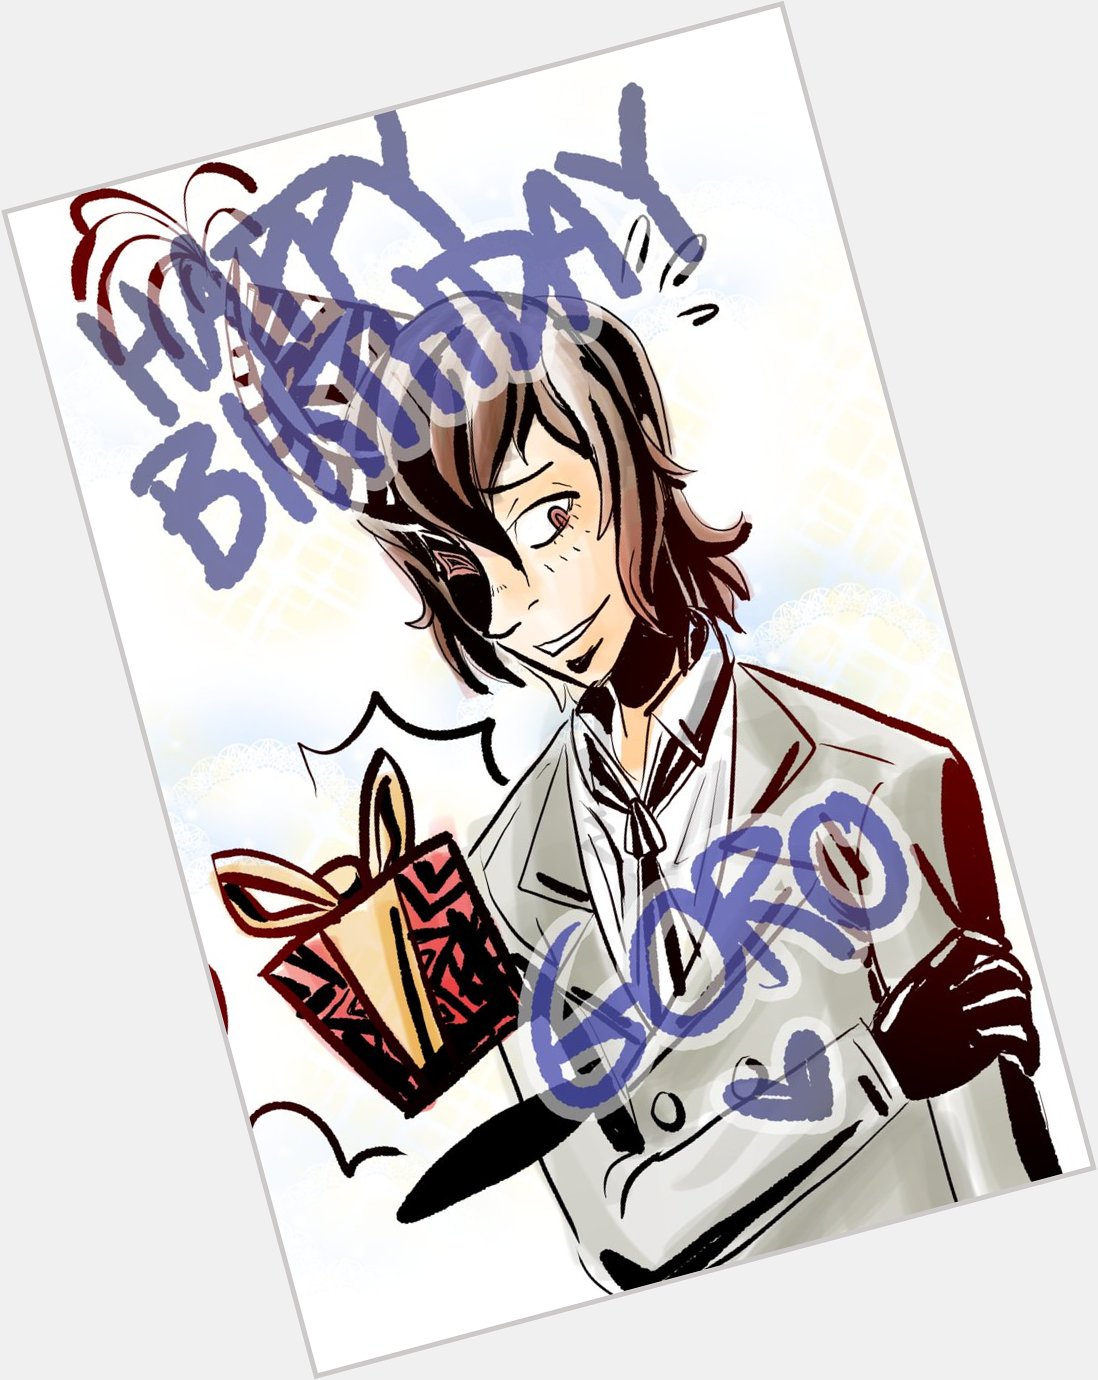 I\m a bit late but Happy Birthday to my detective prince darling <3 